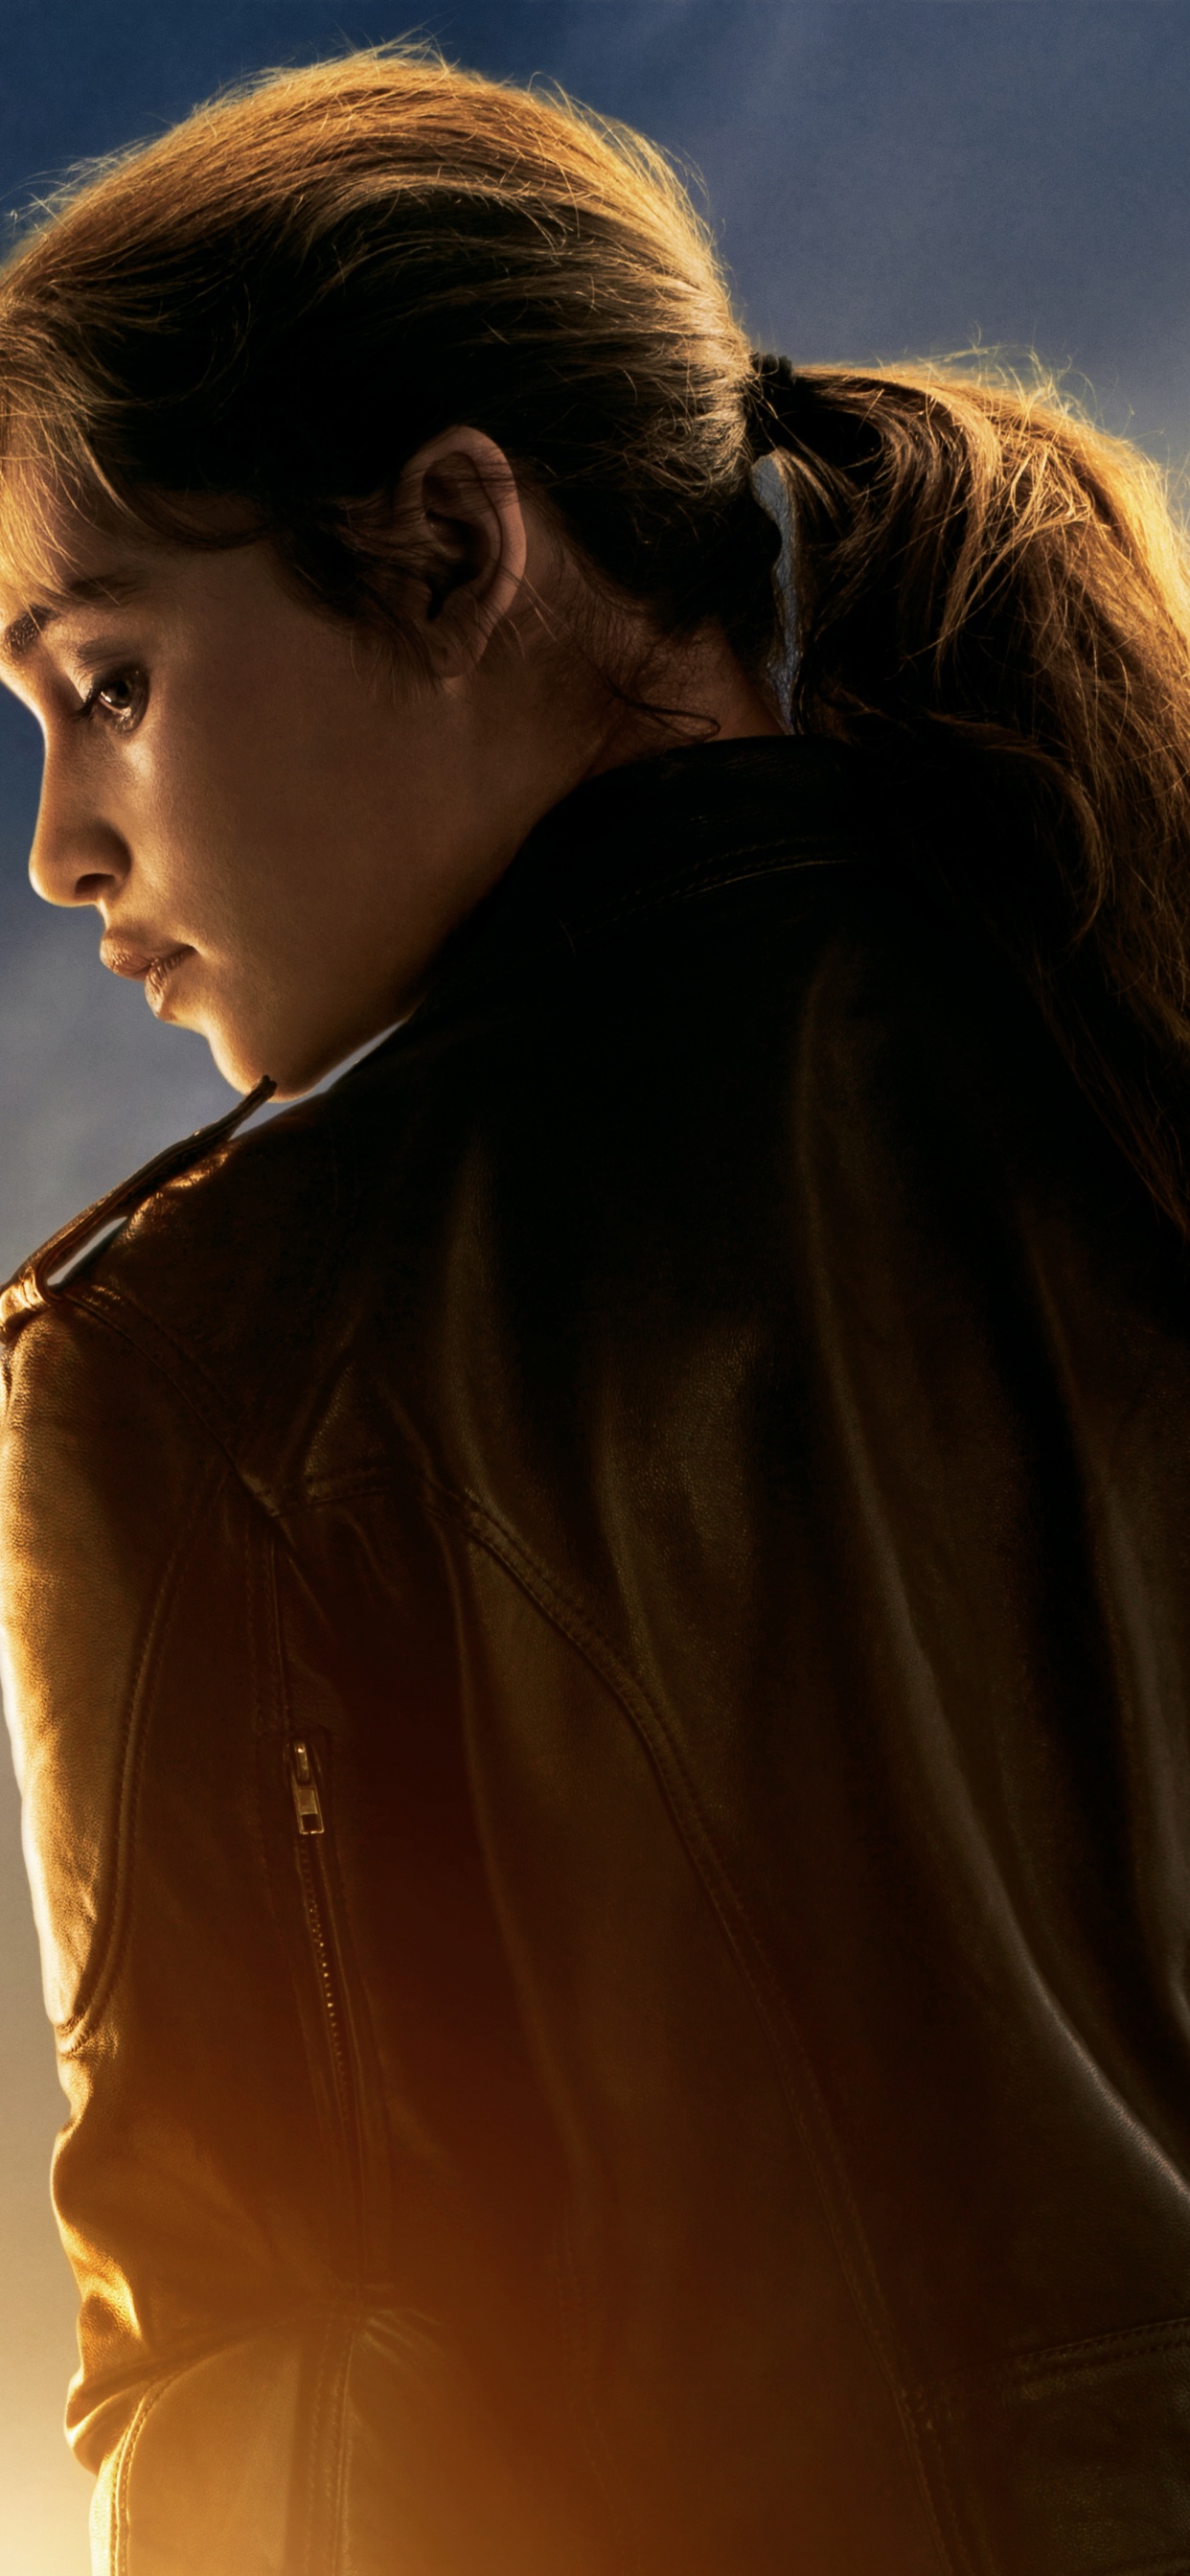 Woman in Brown Leather Jacket Under Cloudy Sky During Daytime. Wallpaper in 1242x2688 Resolution